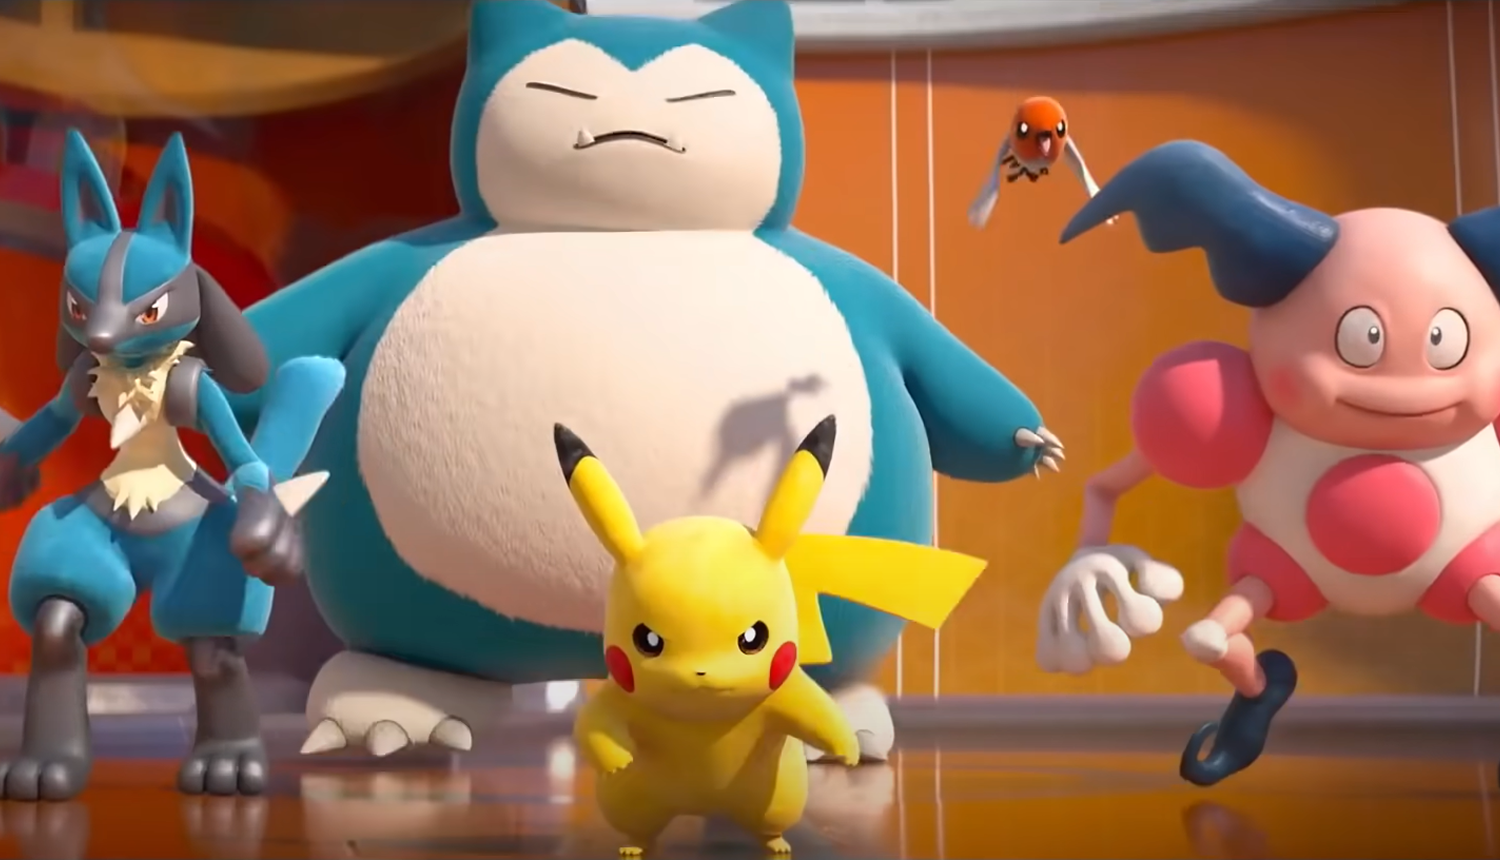 Pokémon Unite' Is the Perfect, Simple Game We Need Right Now